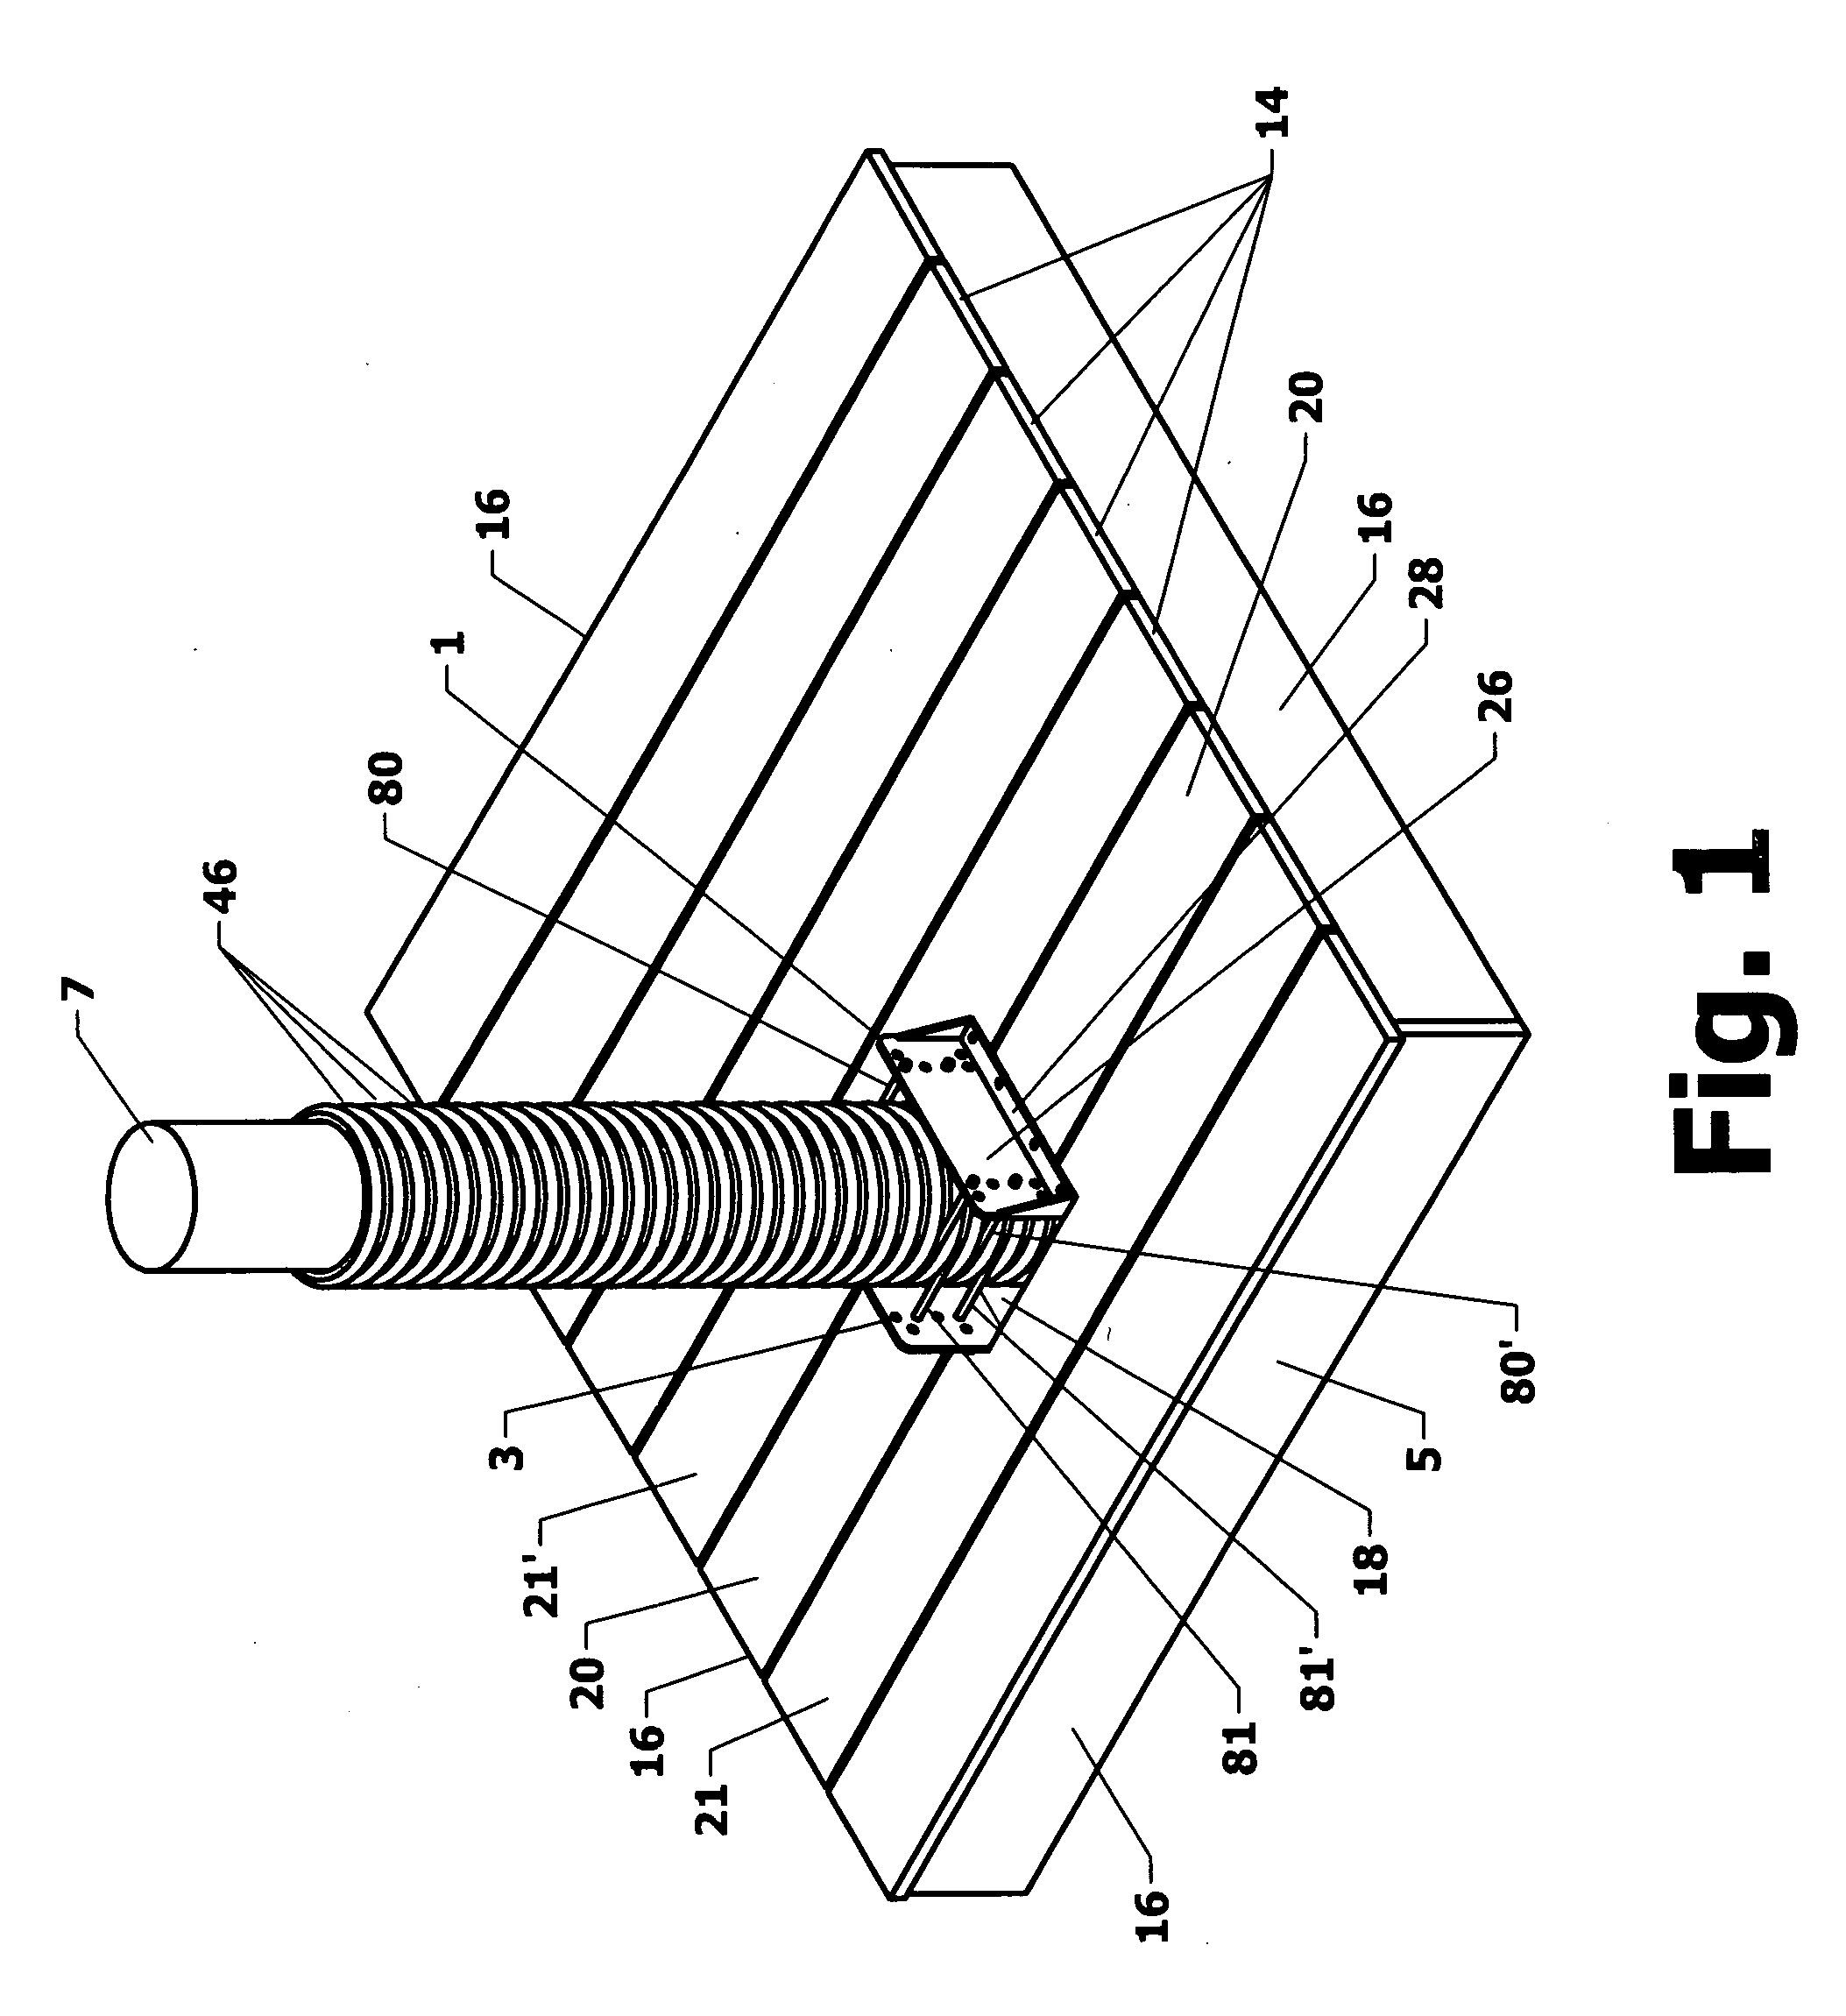 Apparatus for affixing a dock to an inboard mooring pole